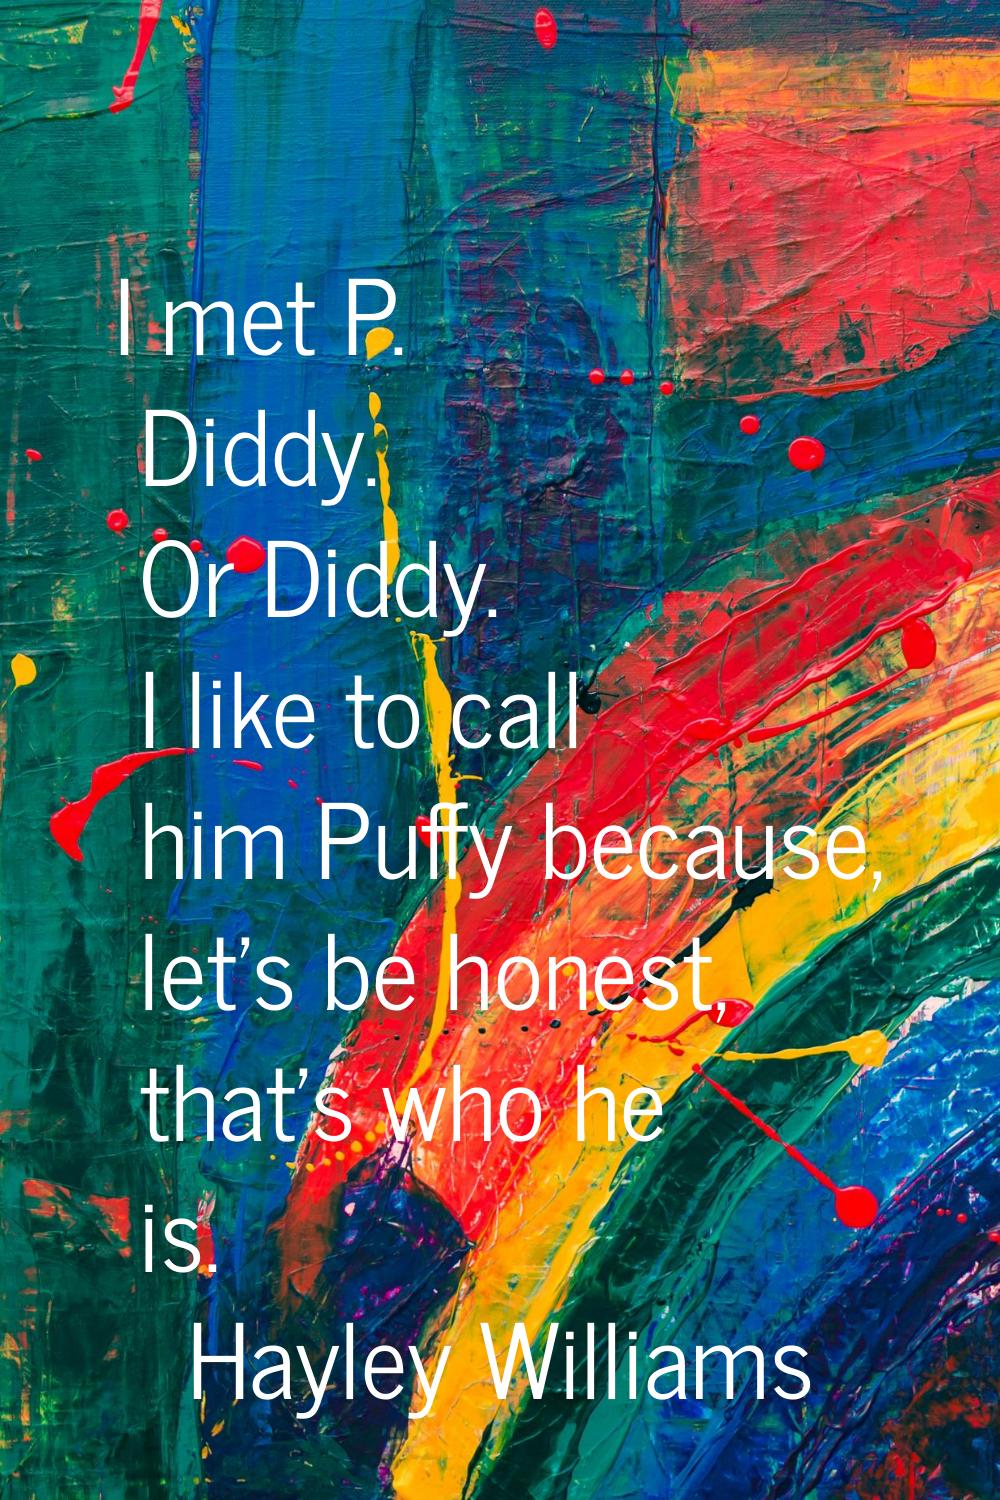 I met P. Diddy. Or Diddy. I like to call him Puffy because, let's be honest, that's who he is.